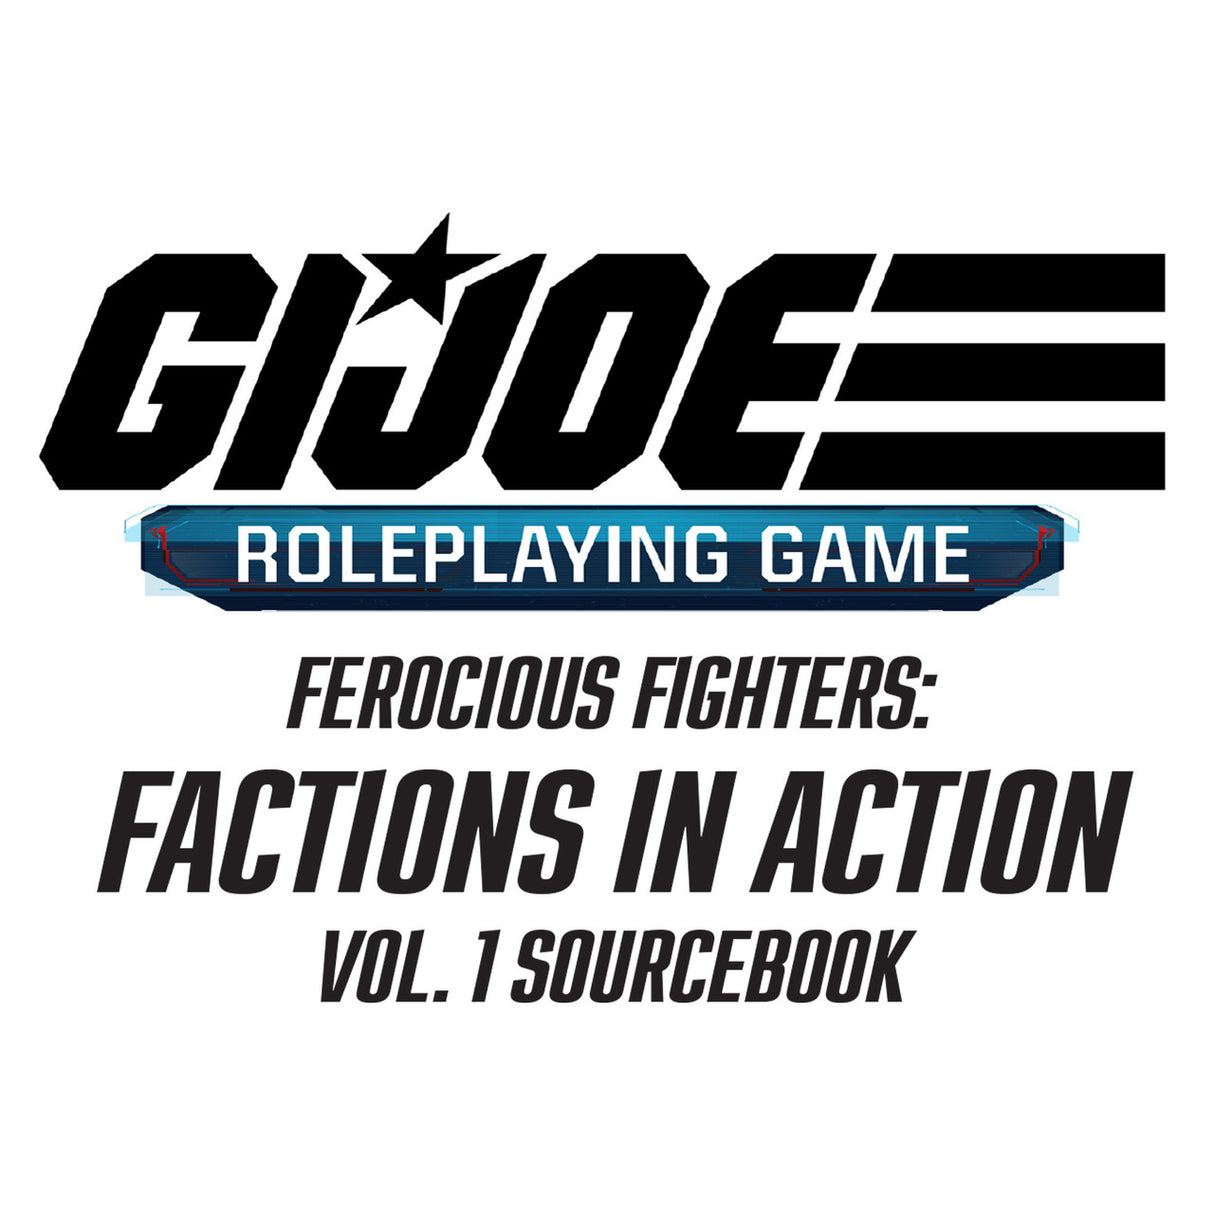 G.I. Joe RPG - Ferocious Fighters: Factions in Action Vol. 1 Sourcebook